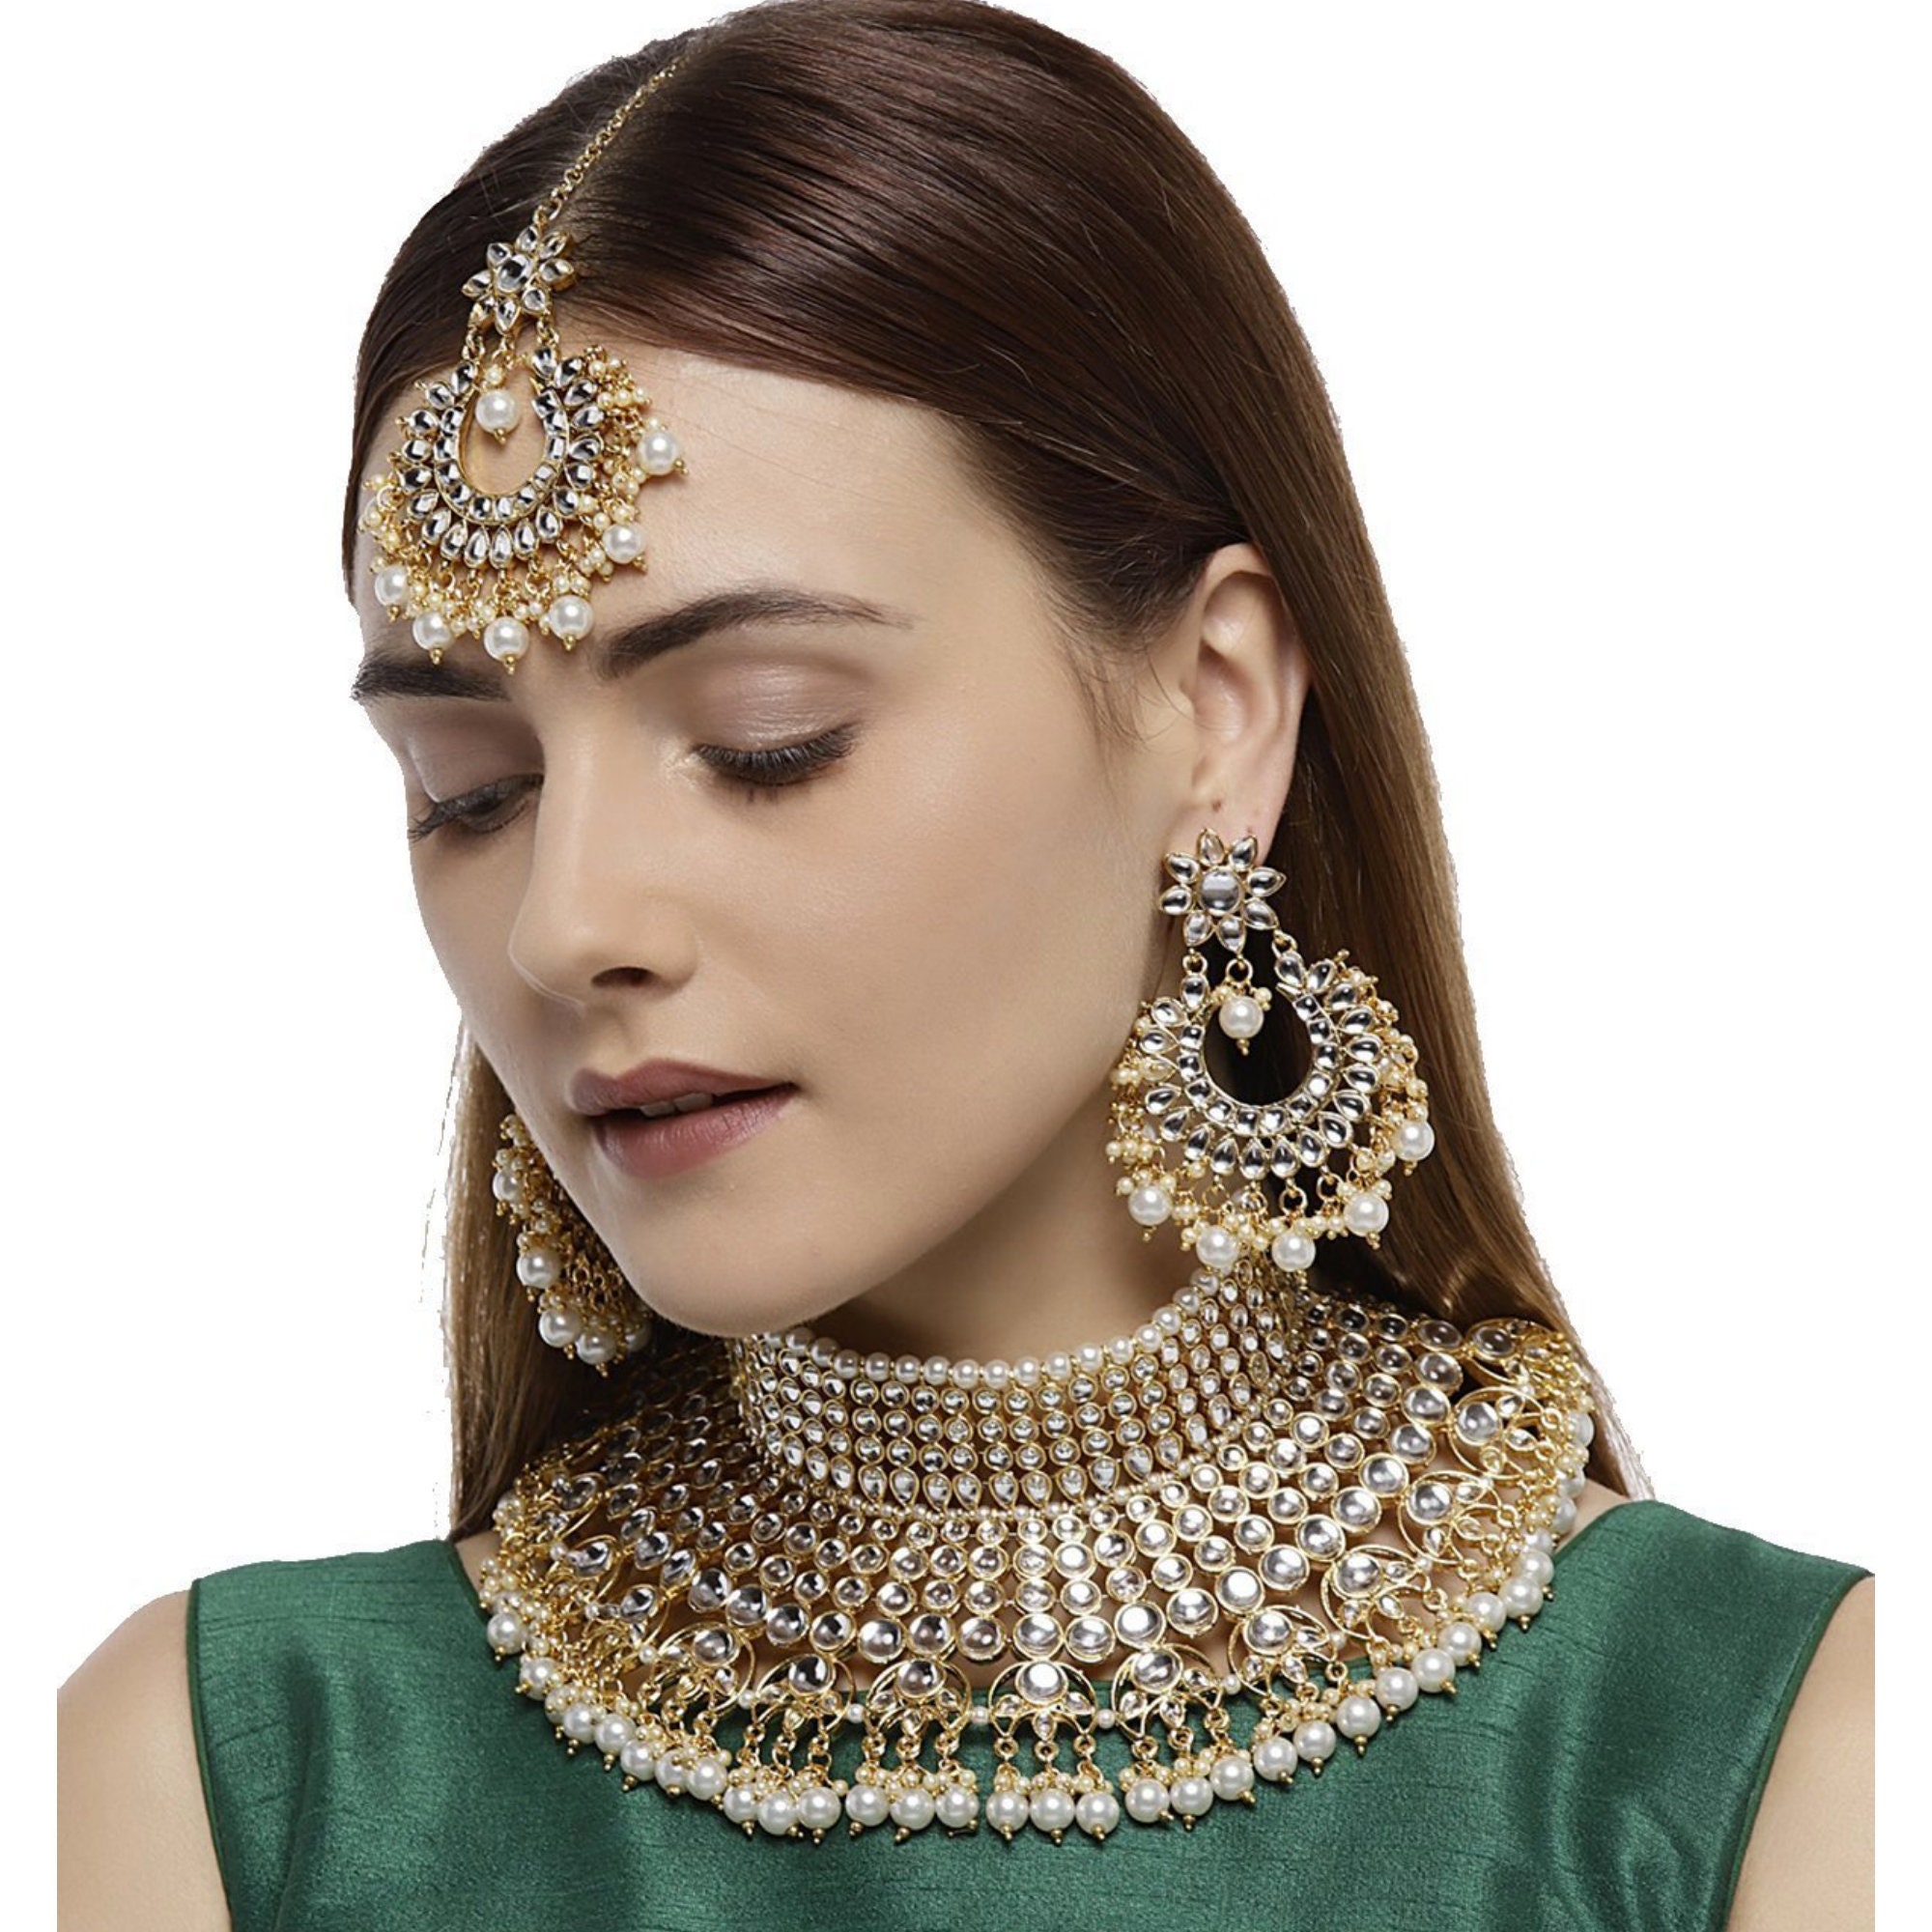 Pearls Studded Indian Ethnic Traditional Gold Plated Choker Necklace 3 Pc Set Necklace Sets Bridal Jewellery For Women,Christmas Jewelry.